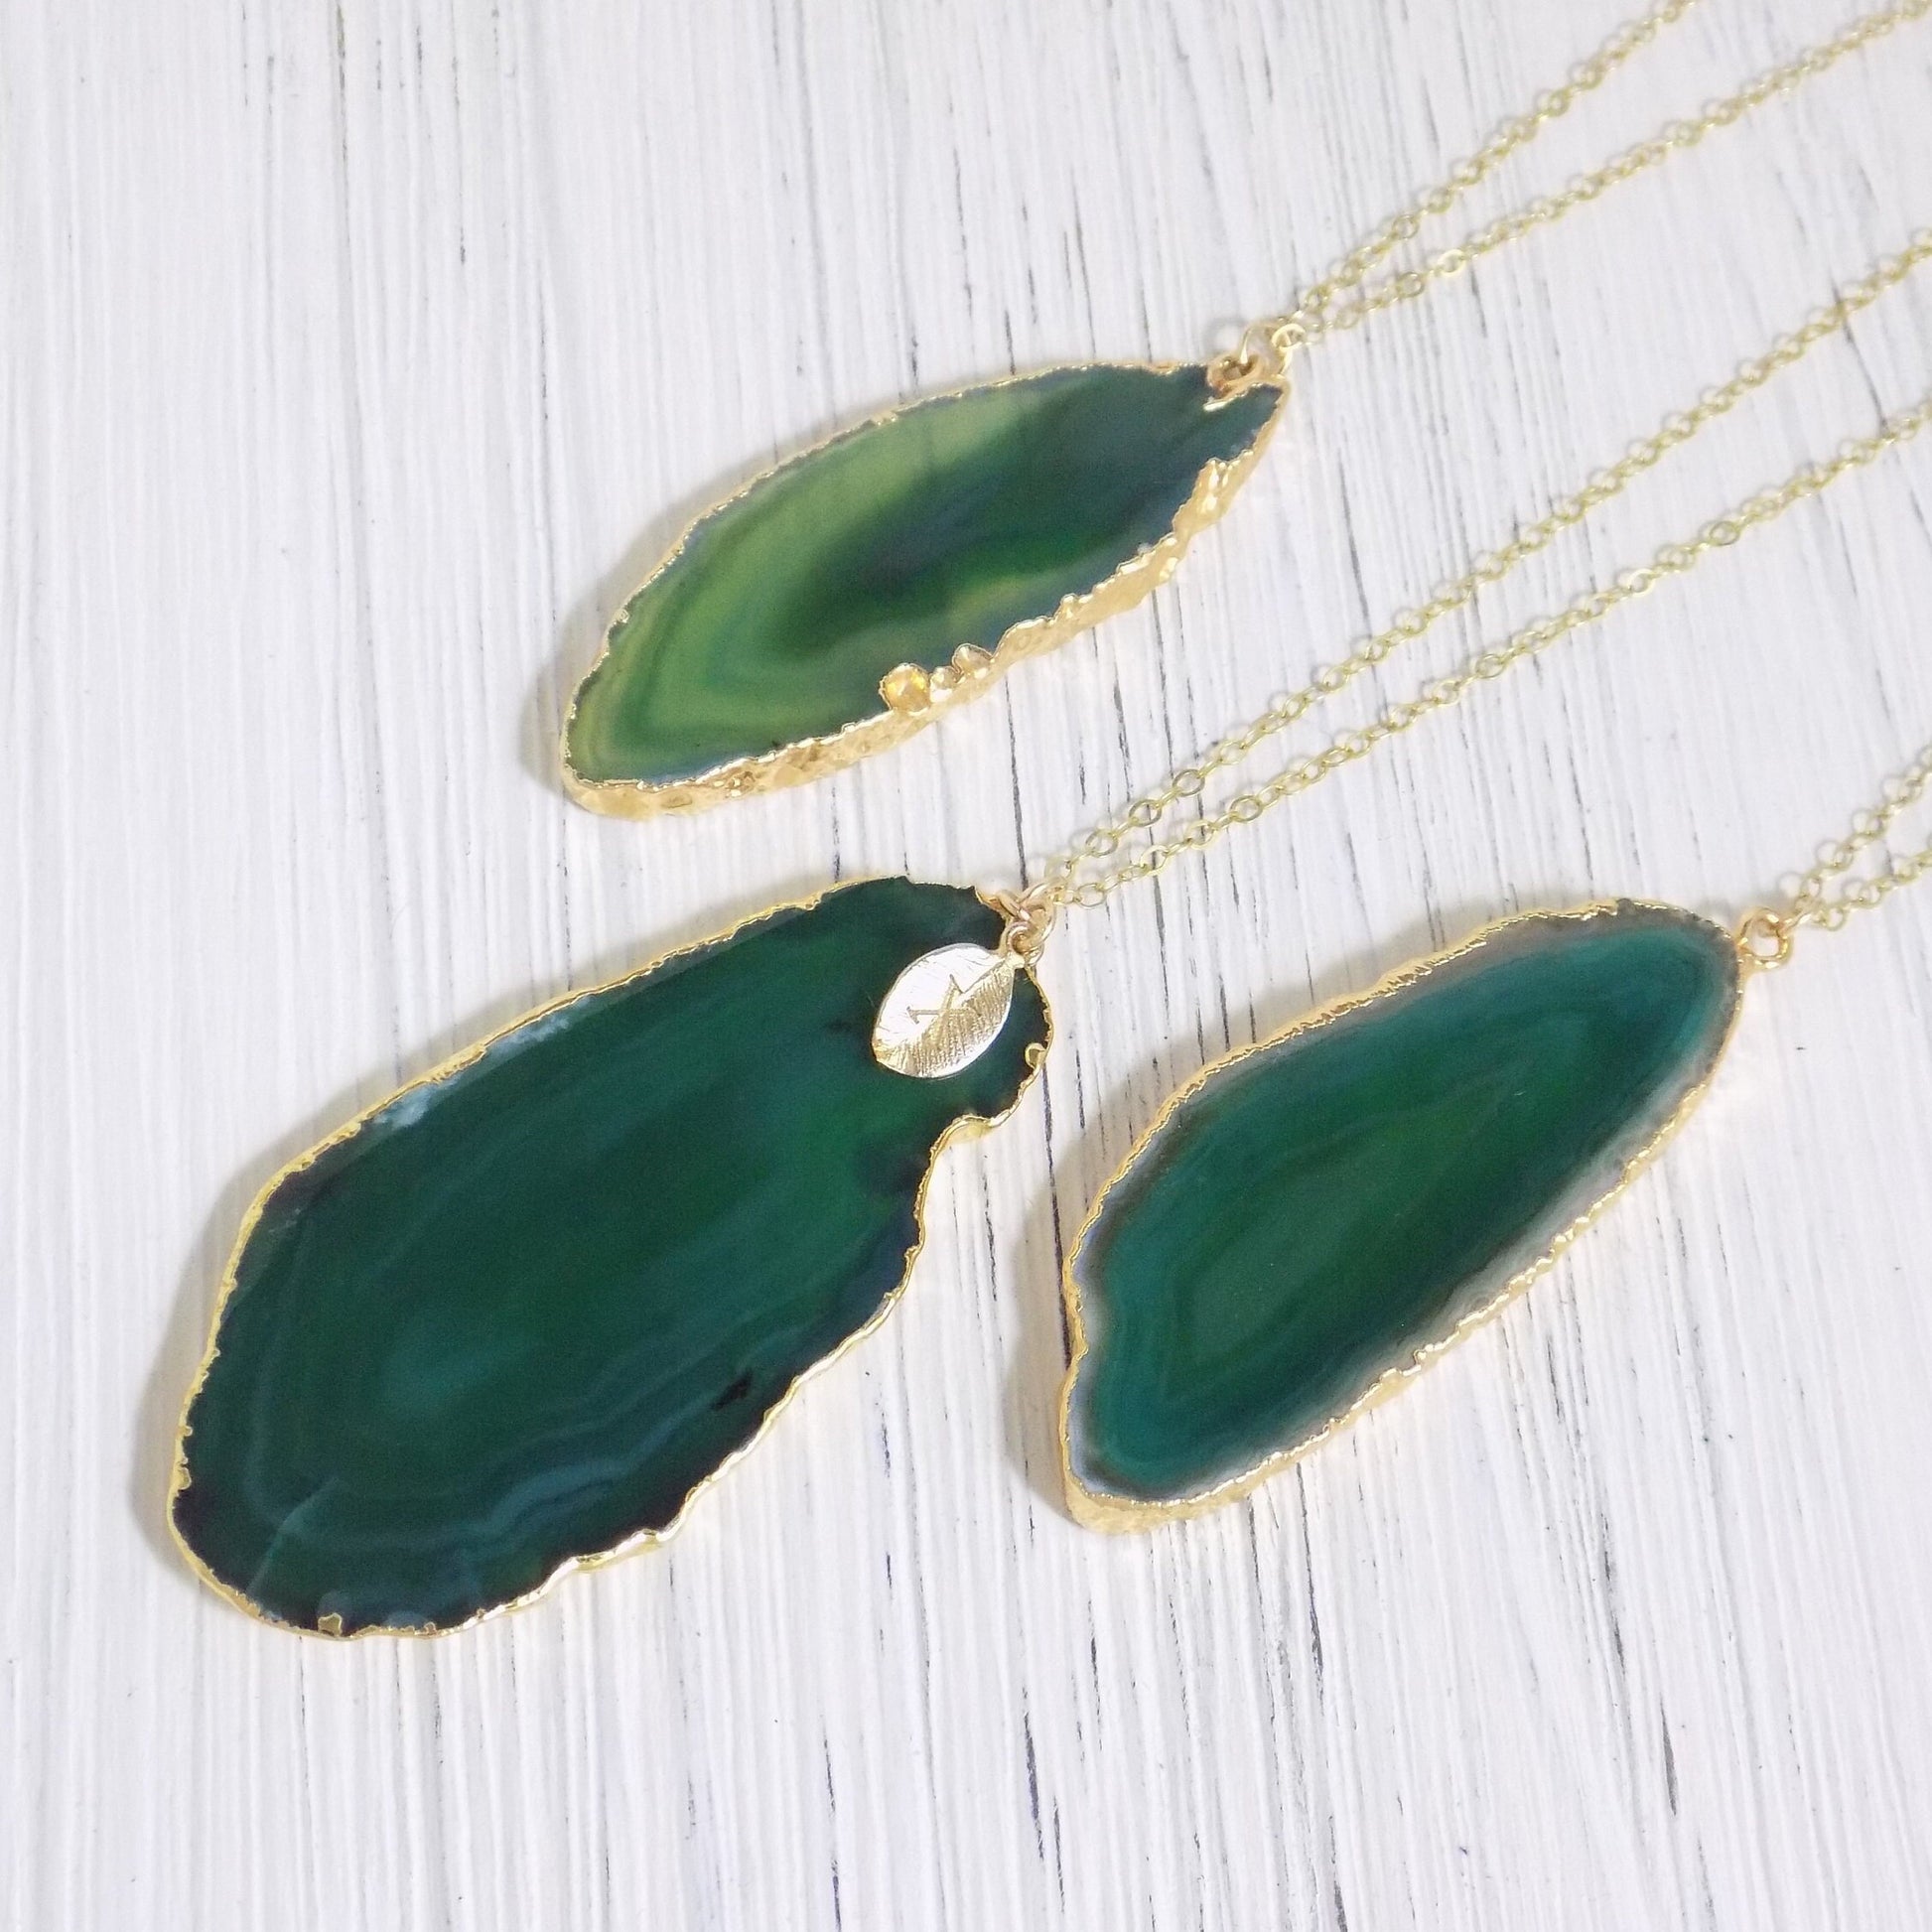 Boho Agate Necklace - Green Agate Necklace